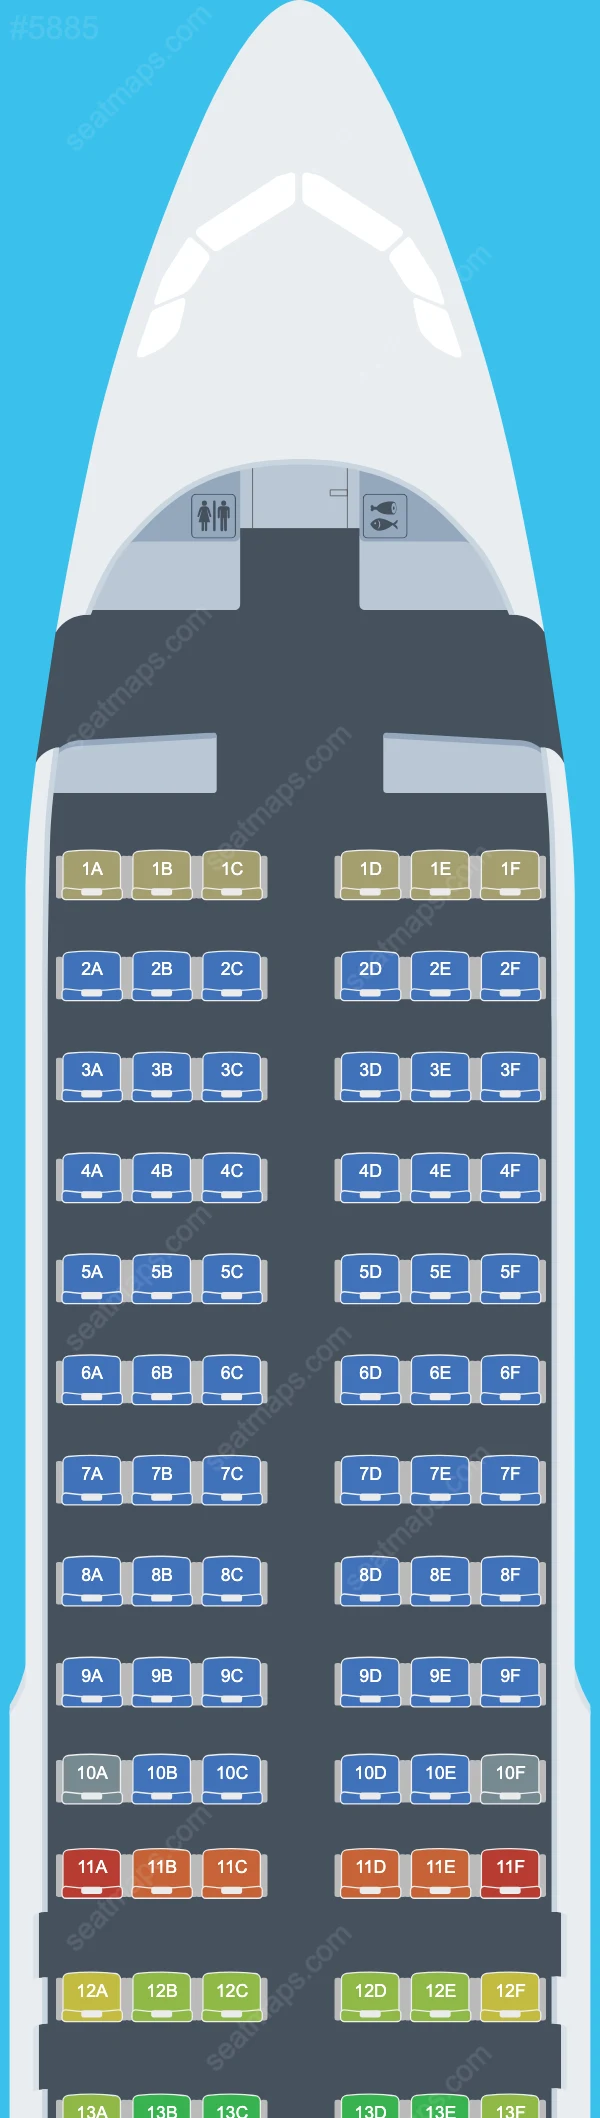 LATAM Airlines Brasil Airbus A320 Seat Maps A320-200neo V.2